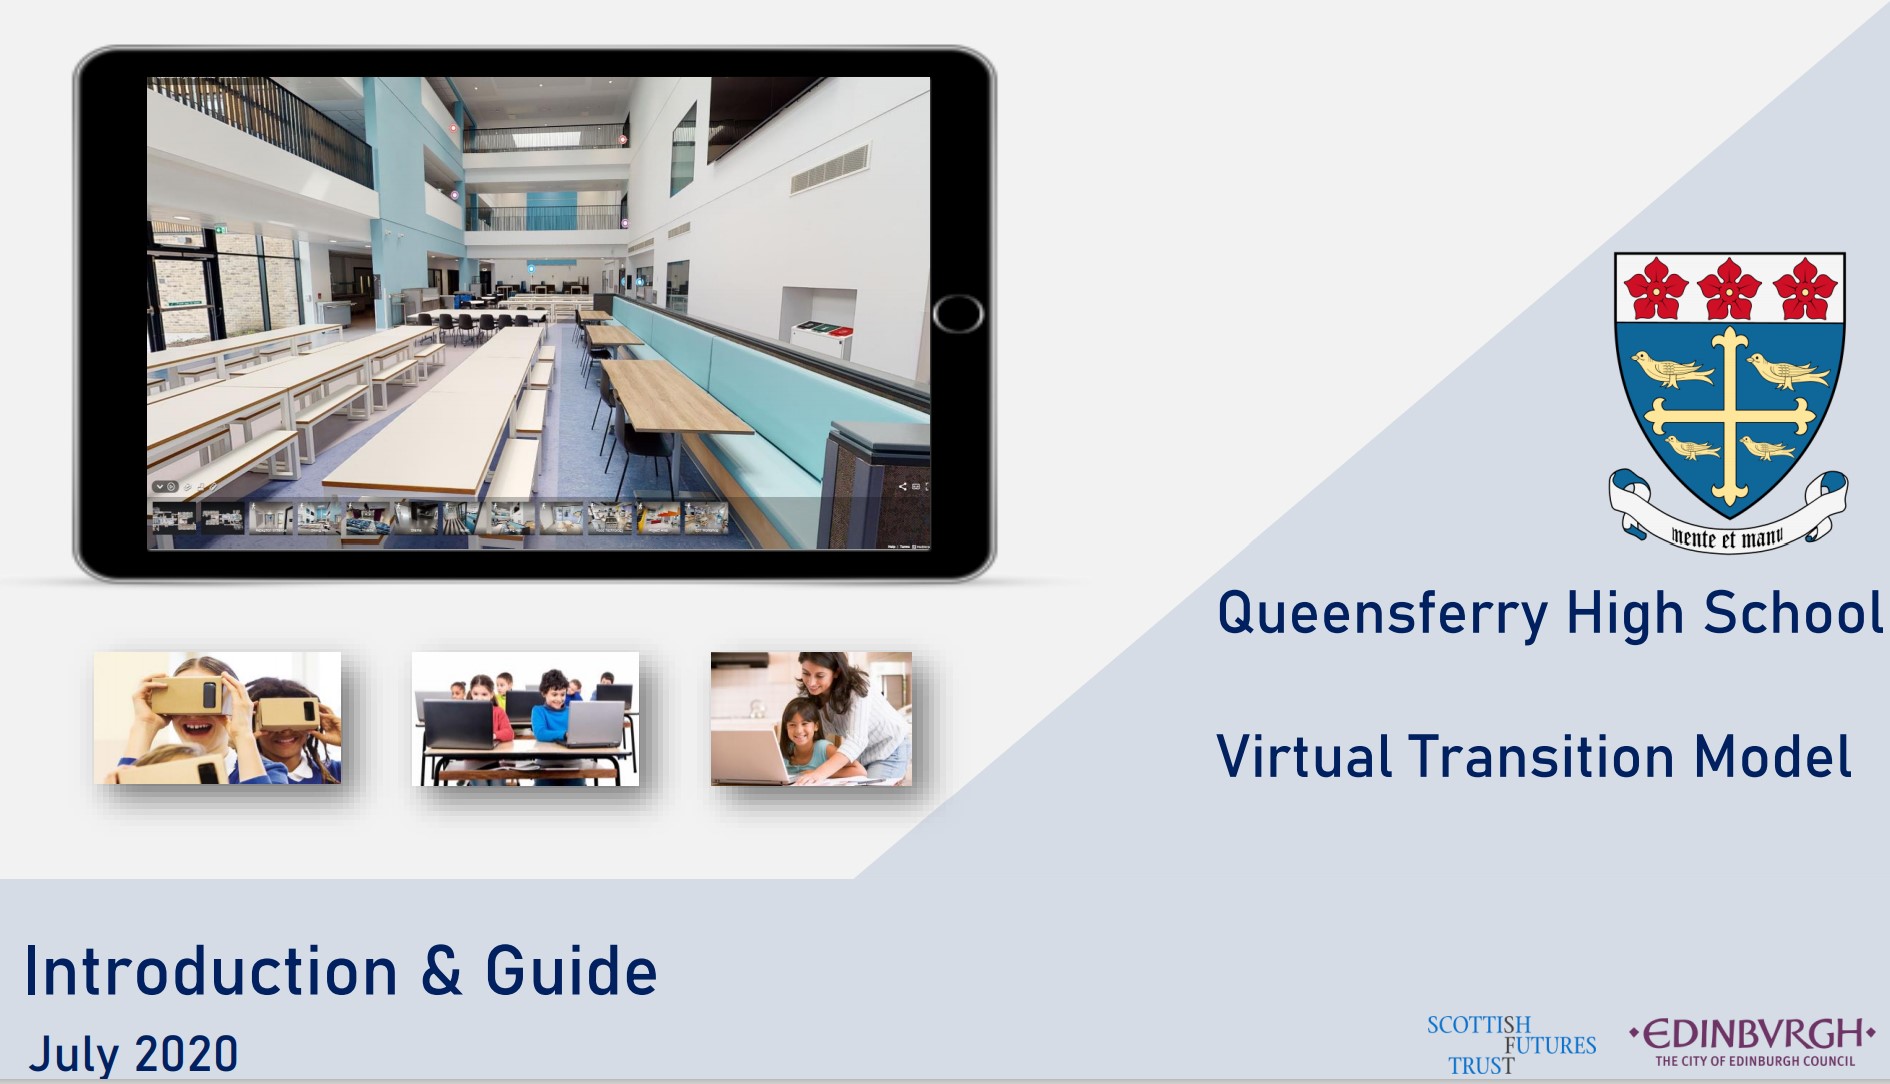 Virtual reality supporting pupils’ transition to new school 